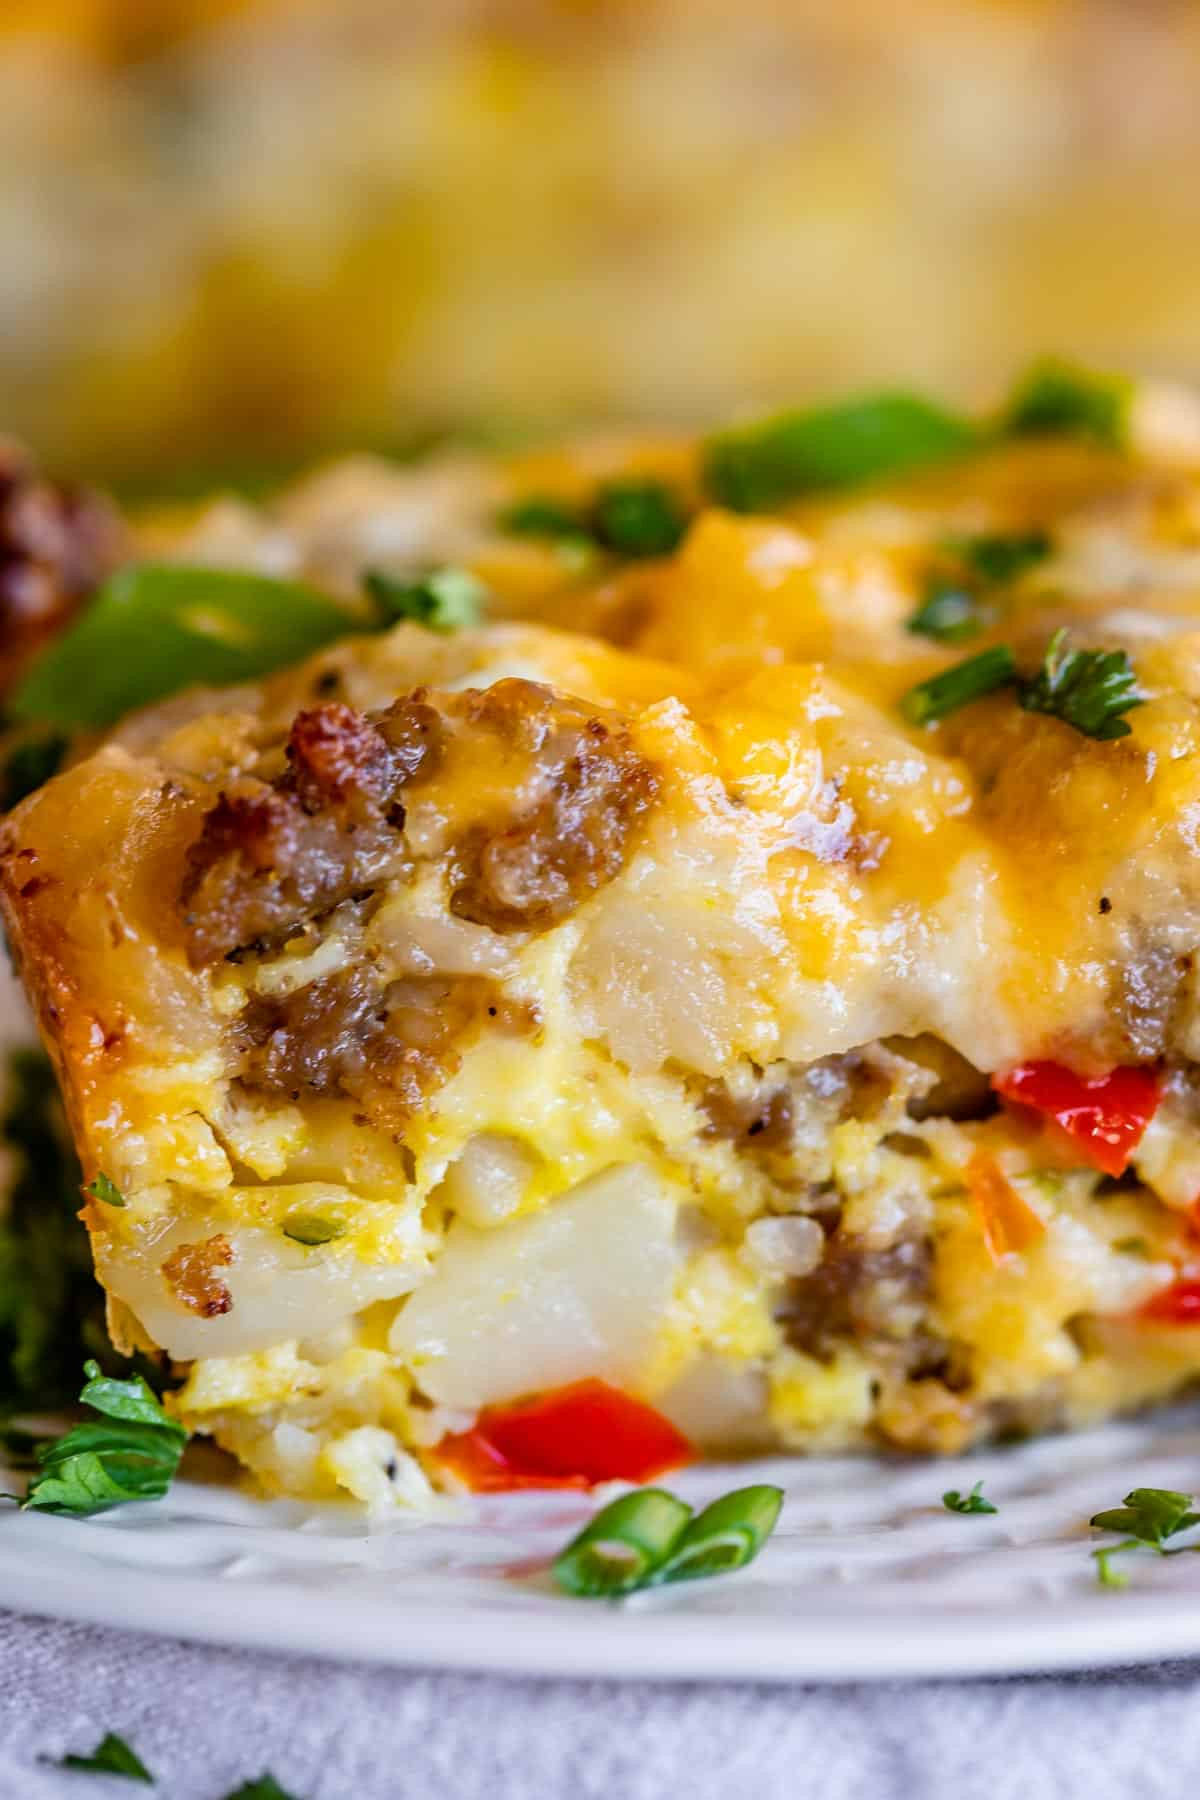 Breakfast Casserole Recipes with Sausage Elegant Easy Sausage Breakfast Casserole Overnight the Food